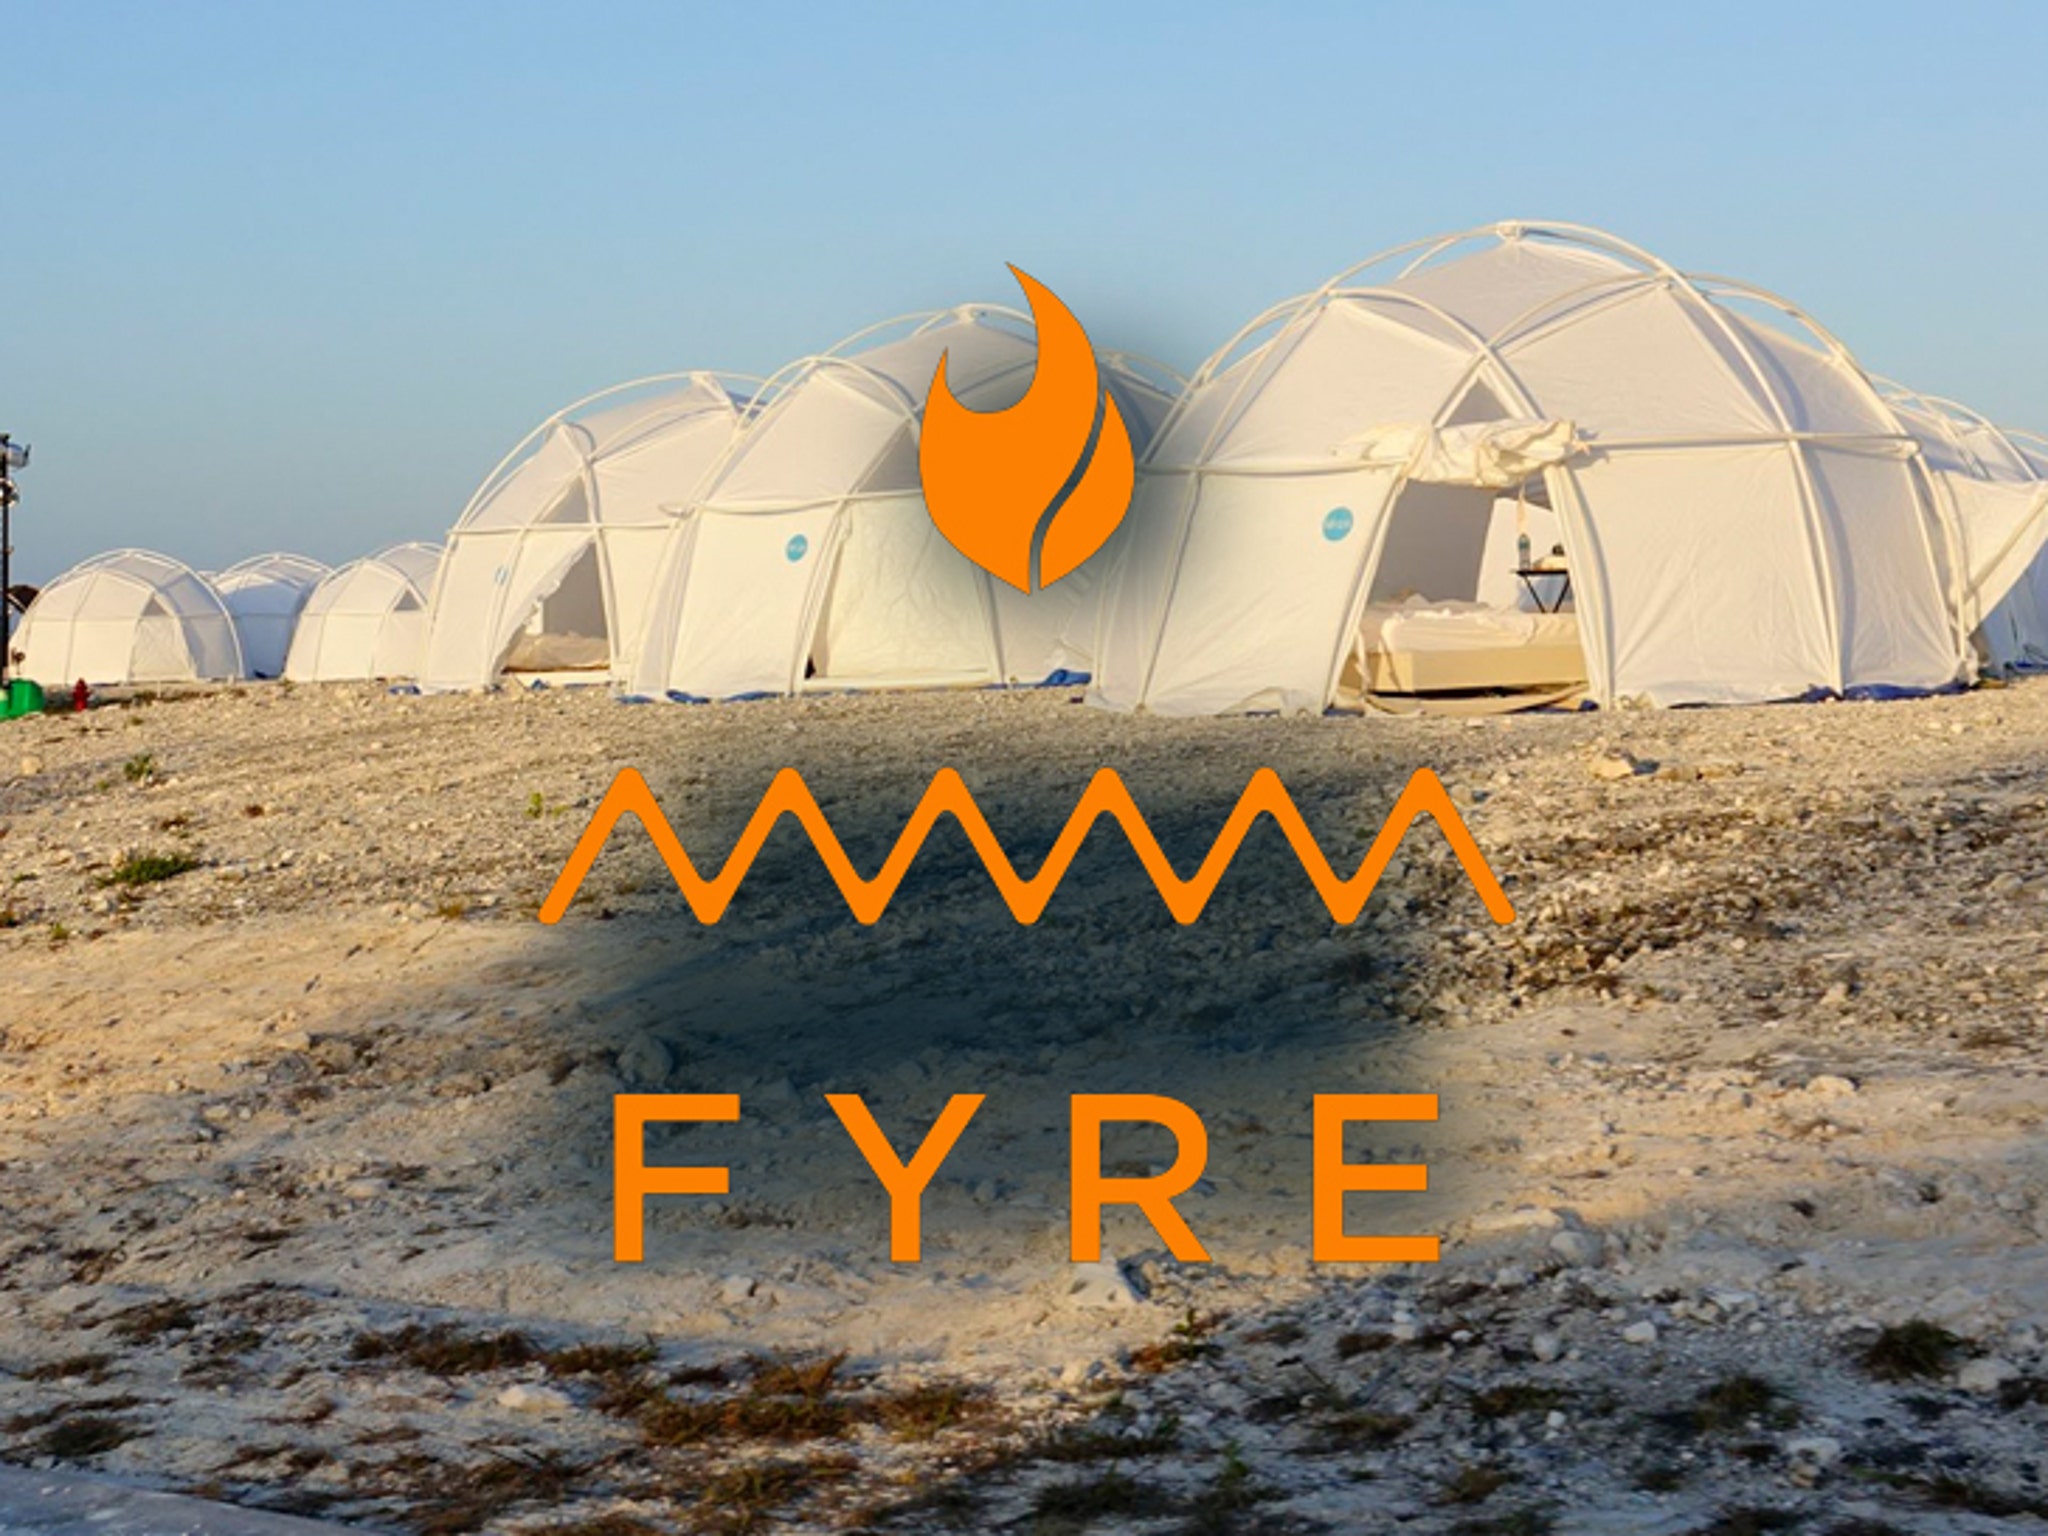 Fyre Festival Official Sued for Scrubbing Social Media, Duping Concertgoers